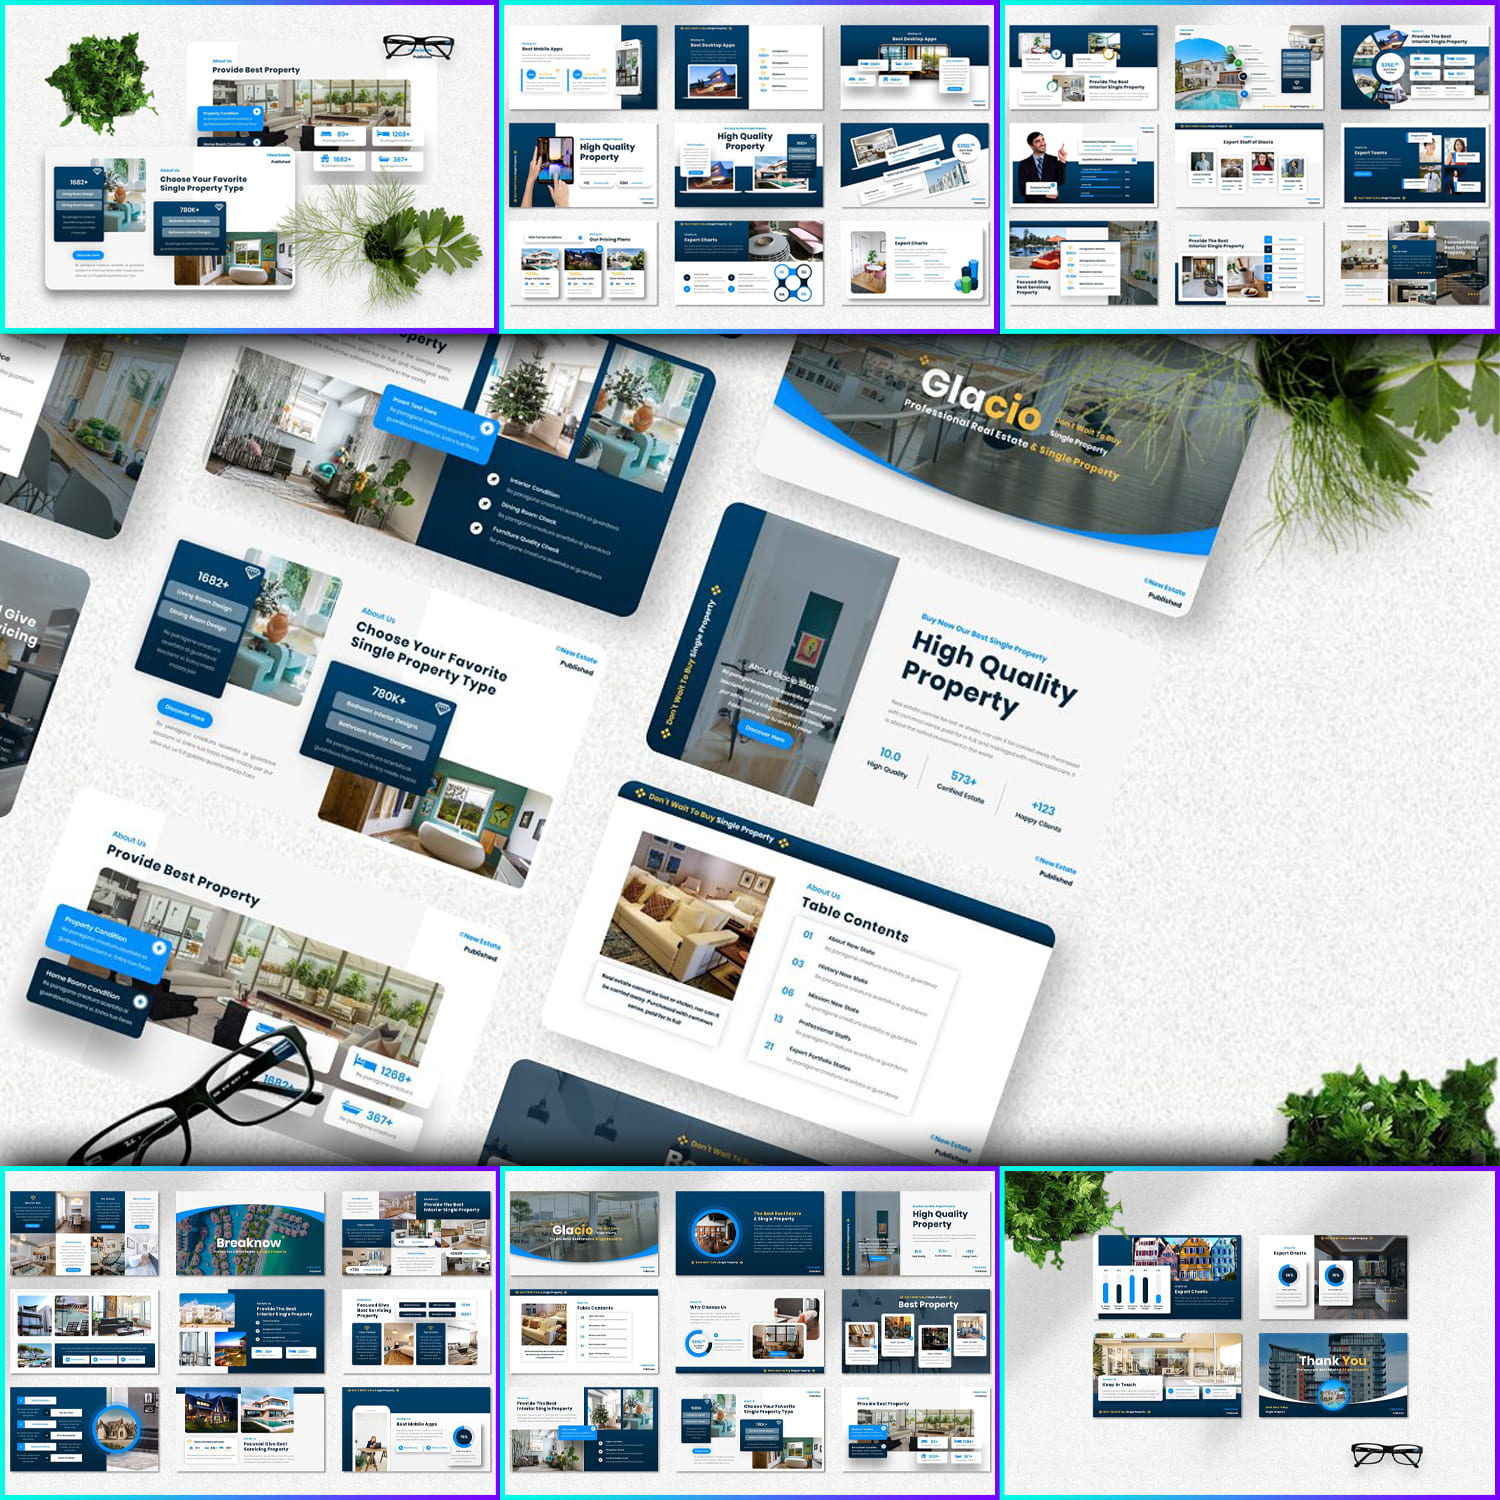 Glacio - Real Estate Powerpoint main image preview.